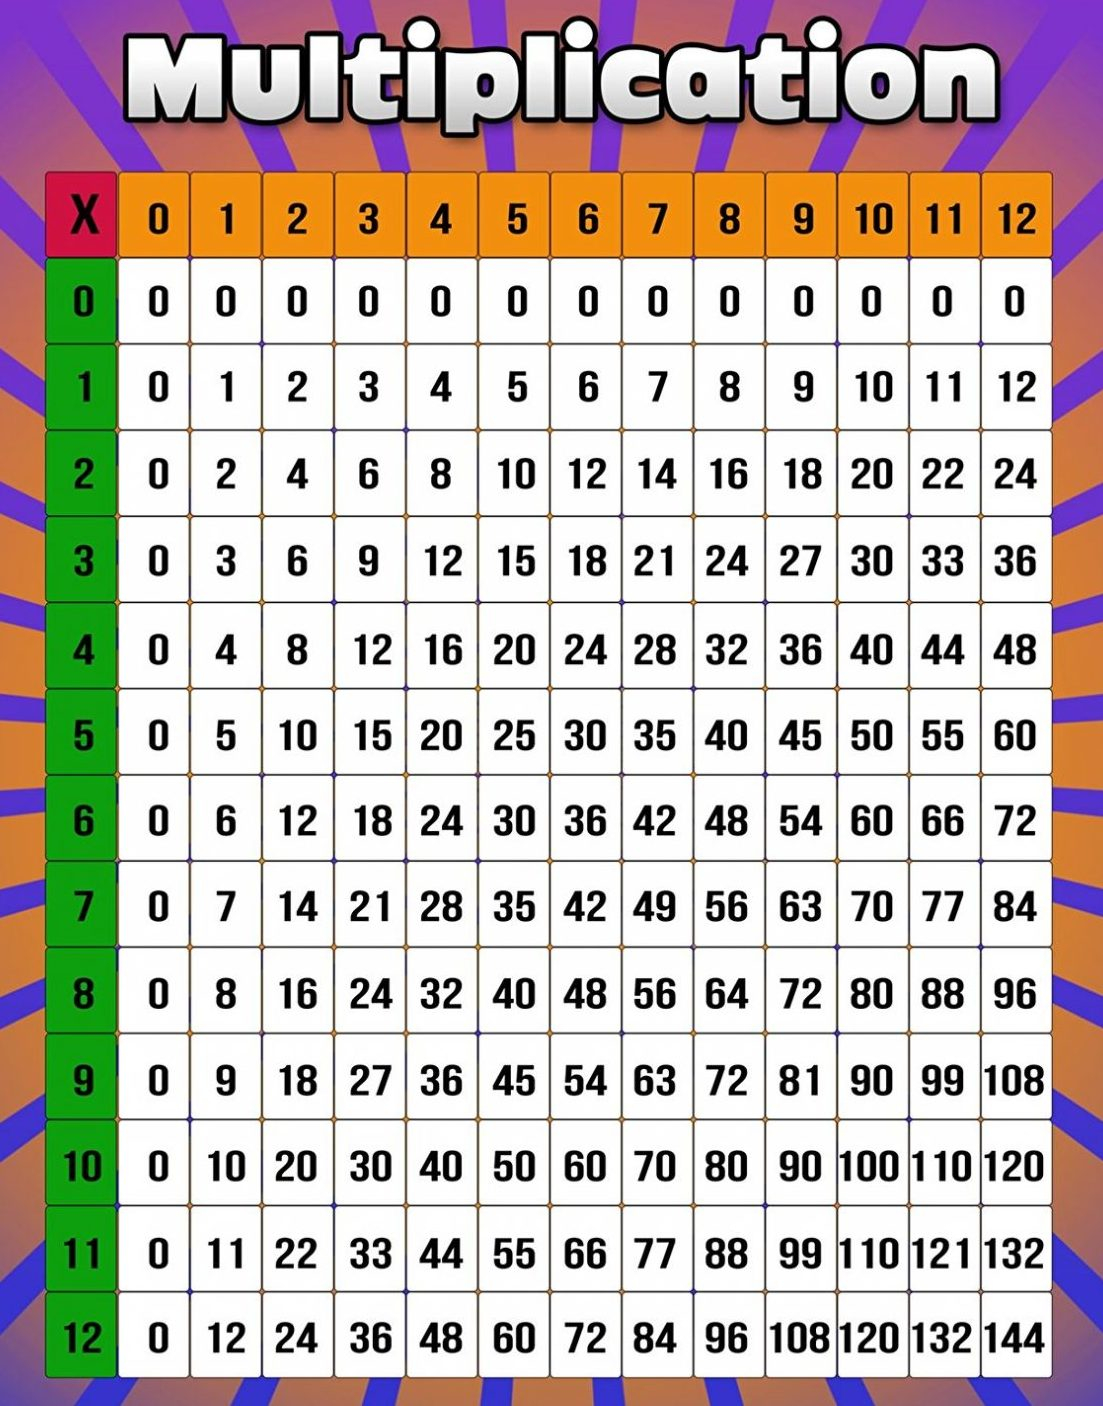 5 time tables chart